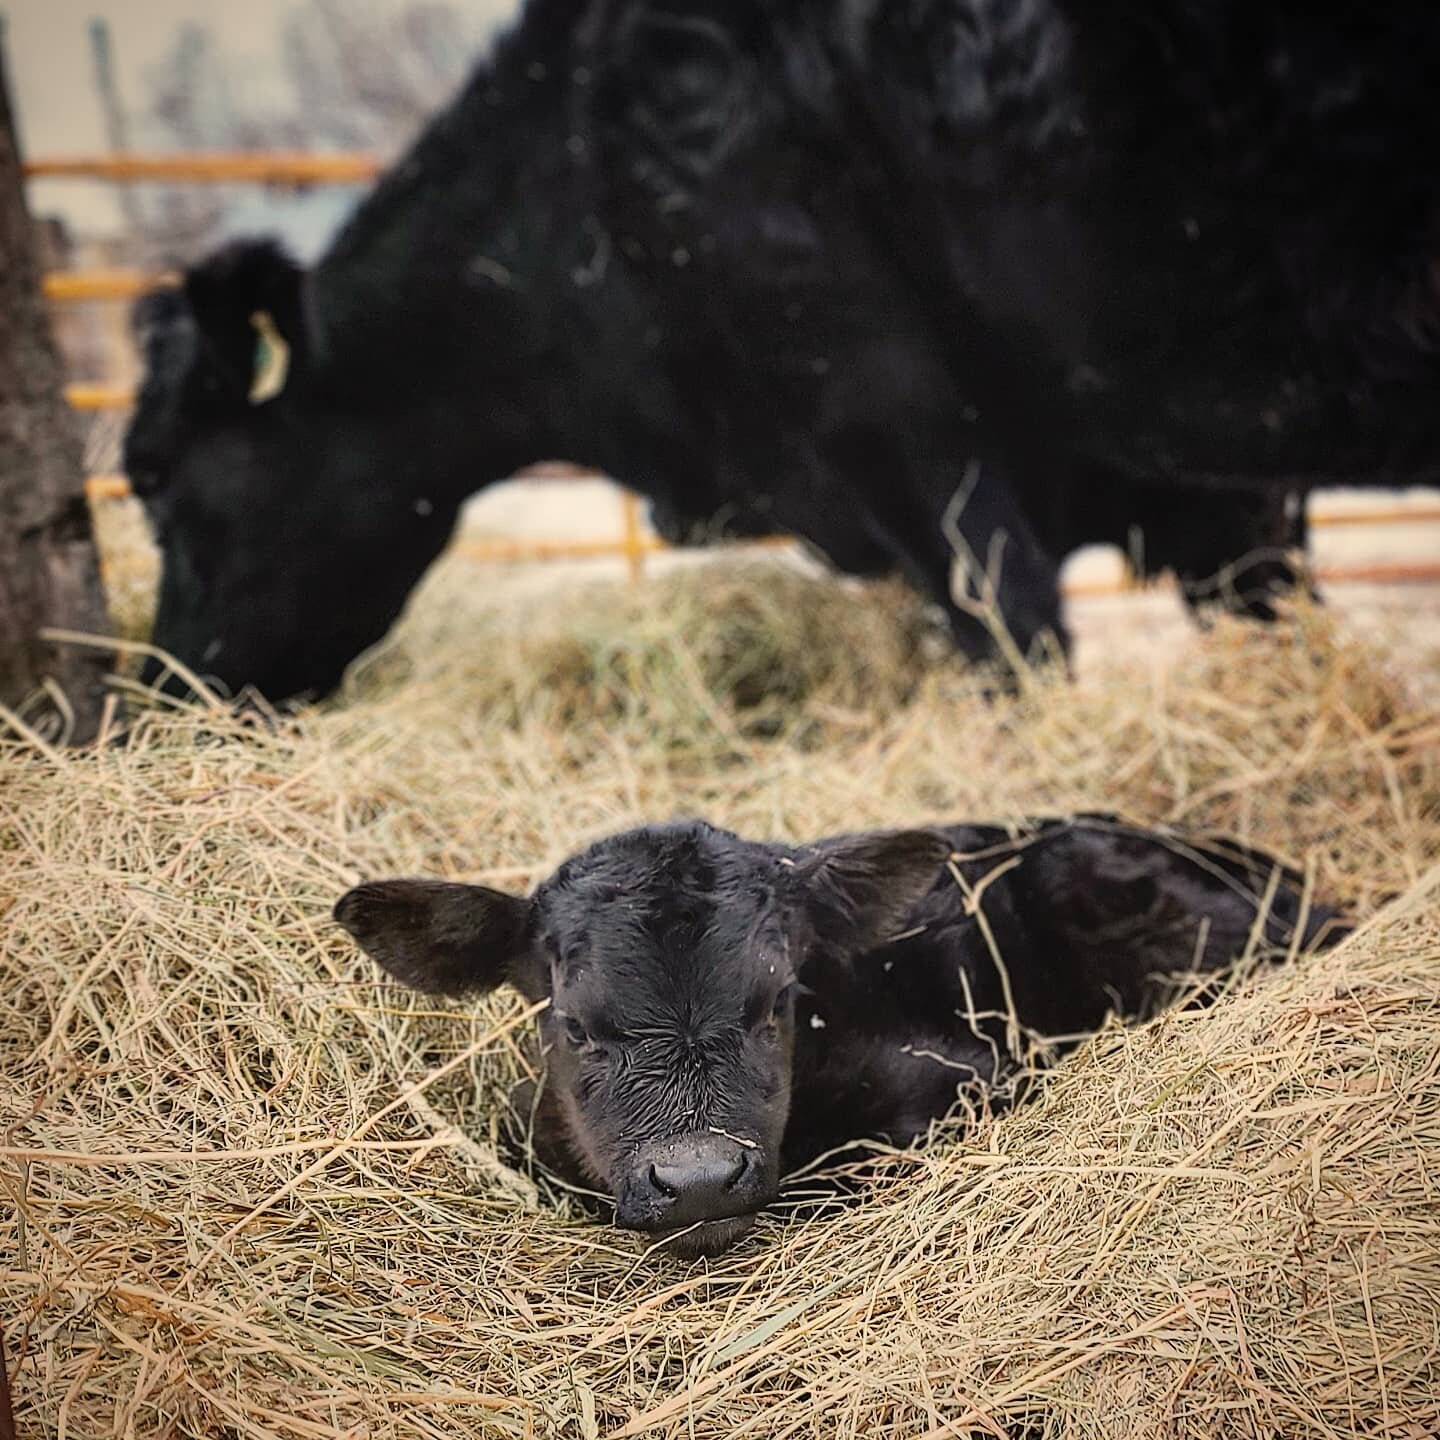 This year's calving season is slowing down. The weather is changing,  warmer days and nights, more sunshine, and it lightens not only our workload but our hearts. Spring is surely making its way. 
#ceriseranch #ranchlife #highcountryliving #viewsfrom